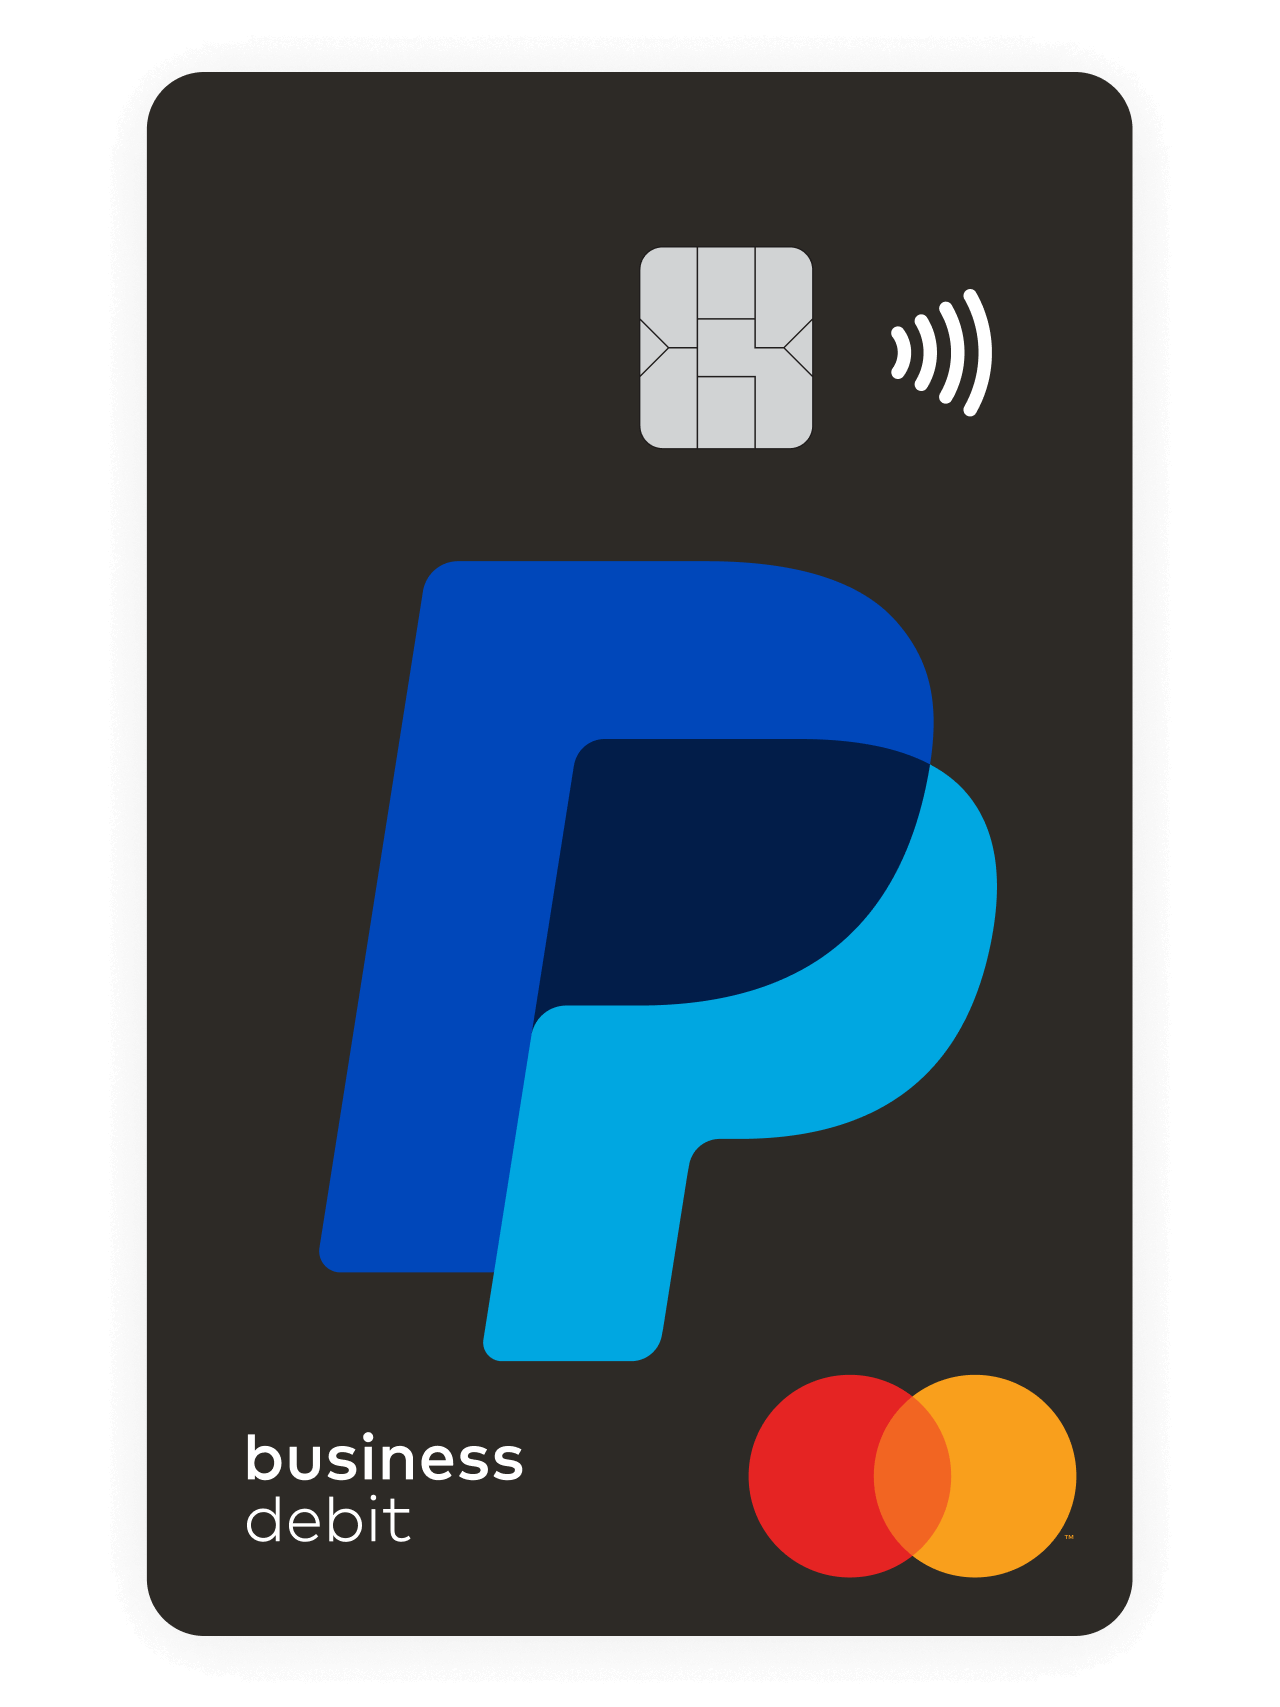 Use PayPal anywhere online with a PayPal Key virtual card | ecobt.ru